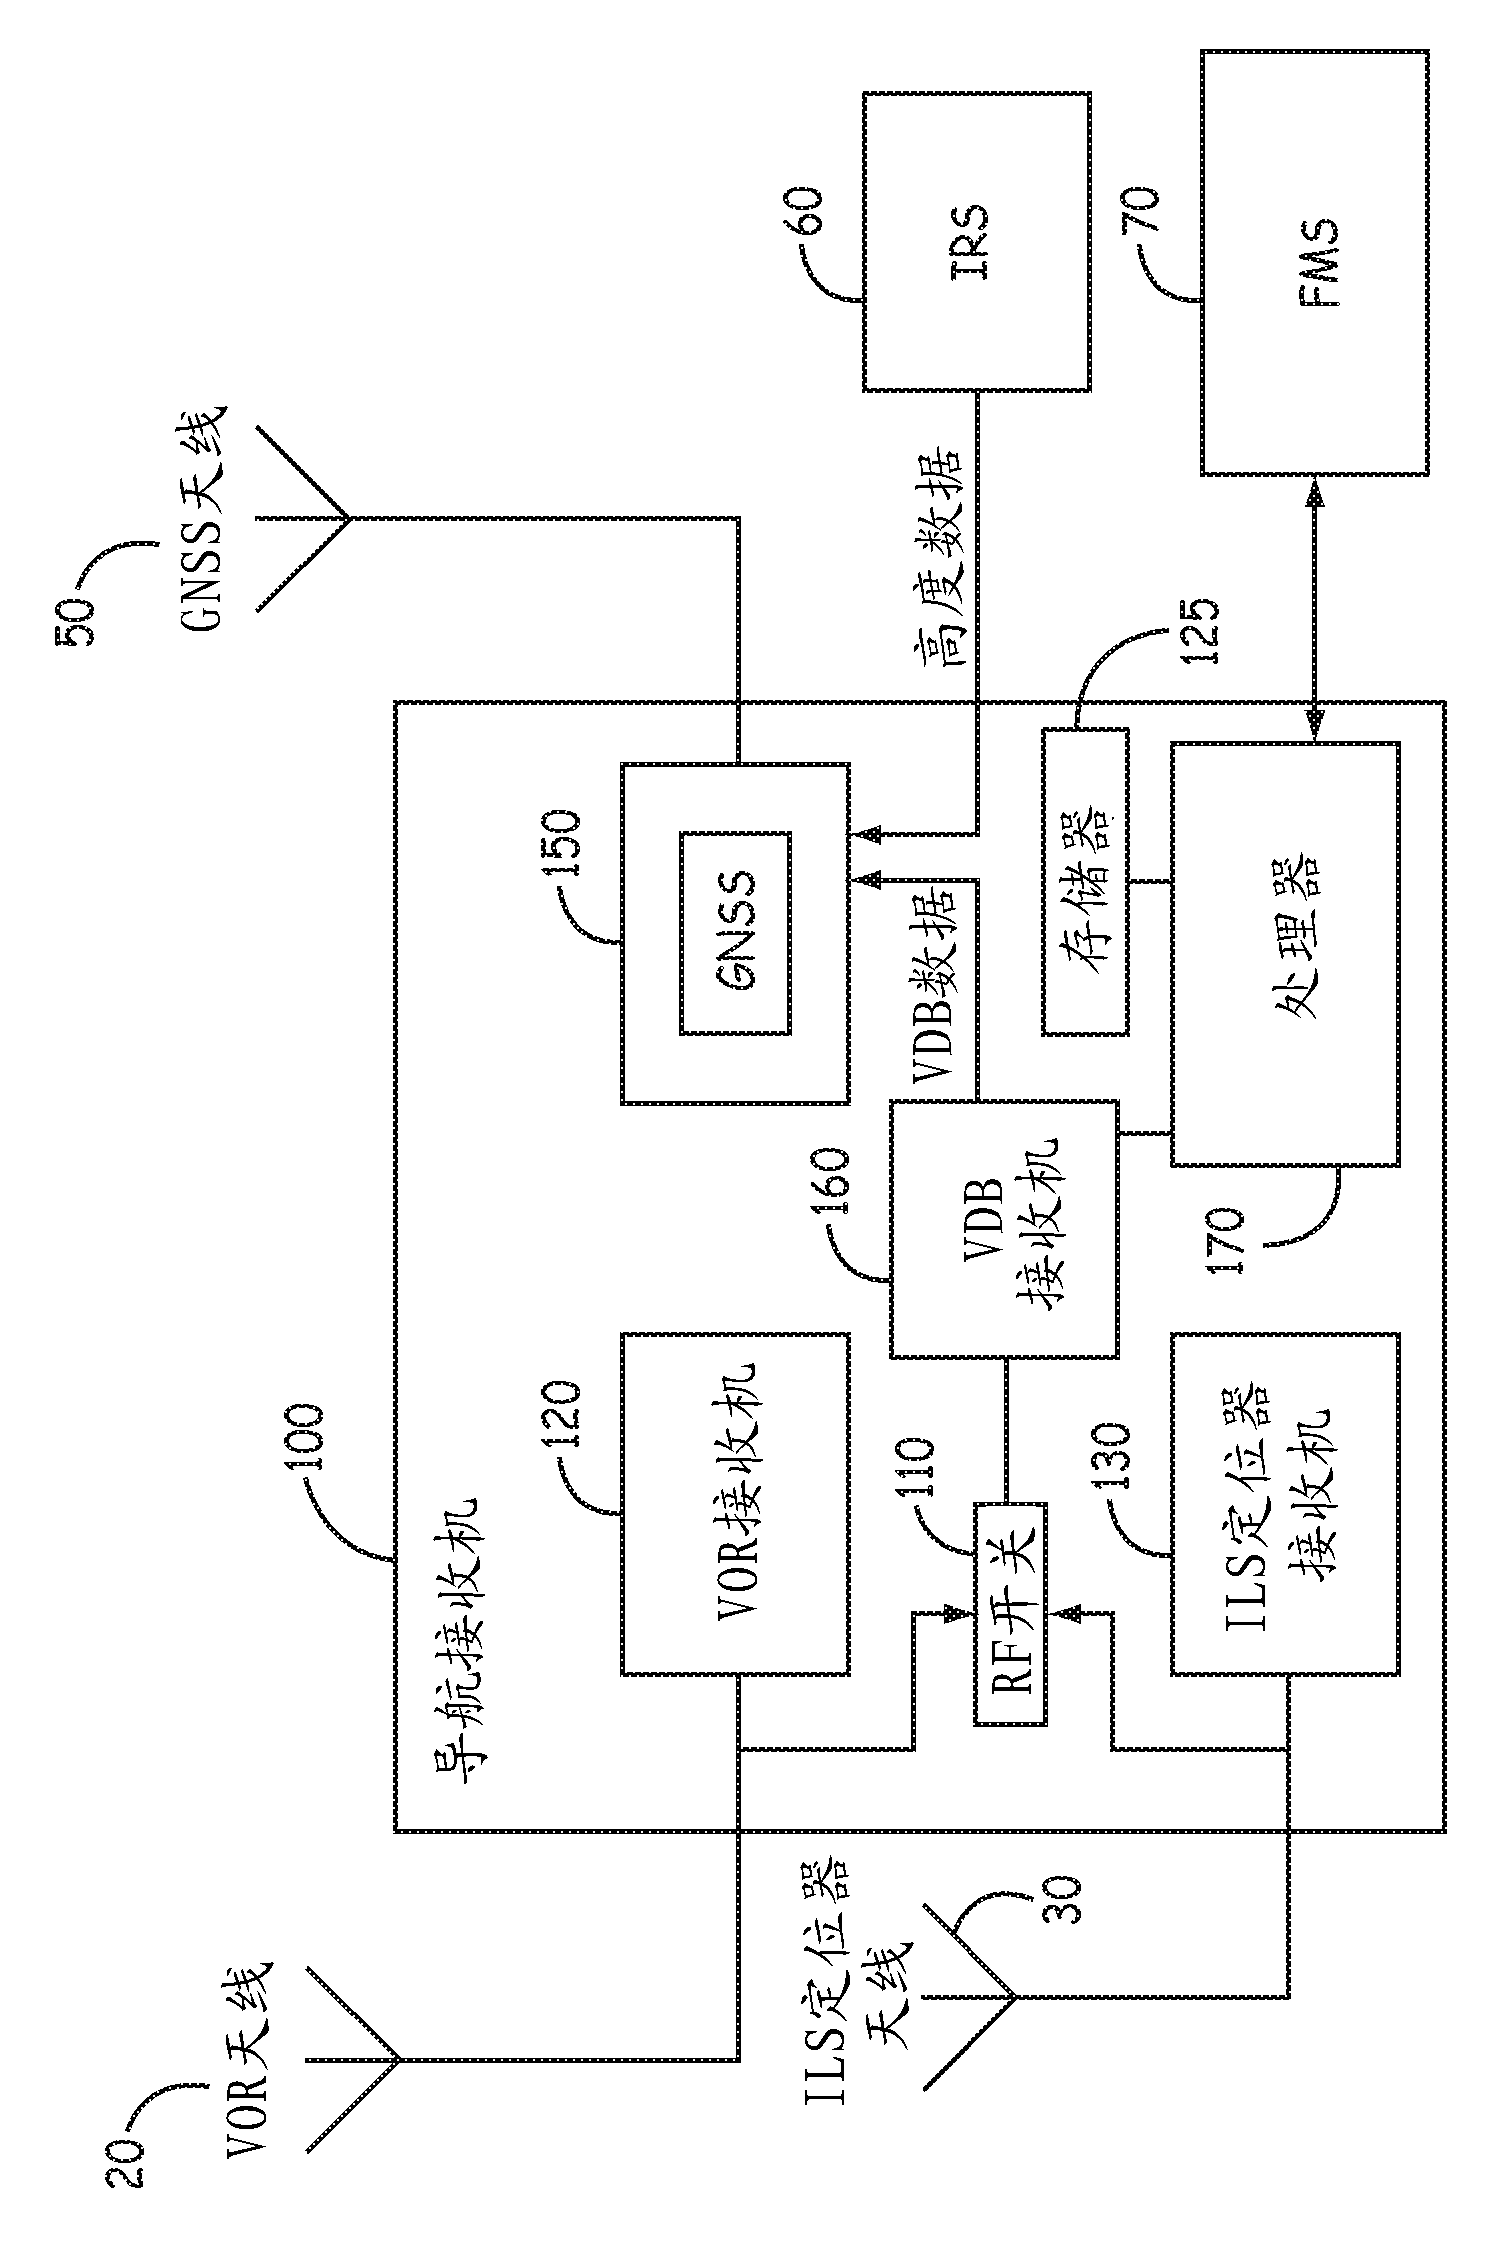 Systems and methods for the selection of antennas in aircraft navigation systems